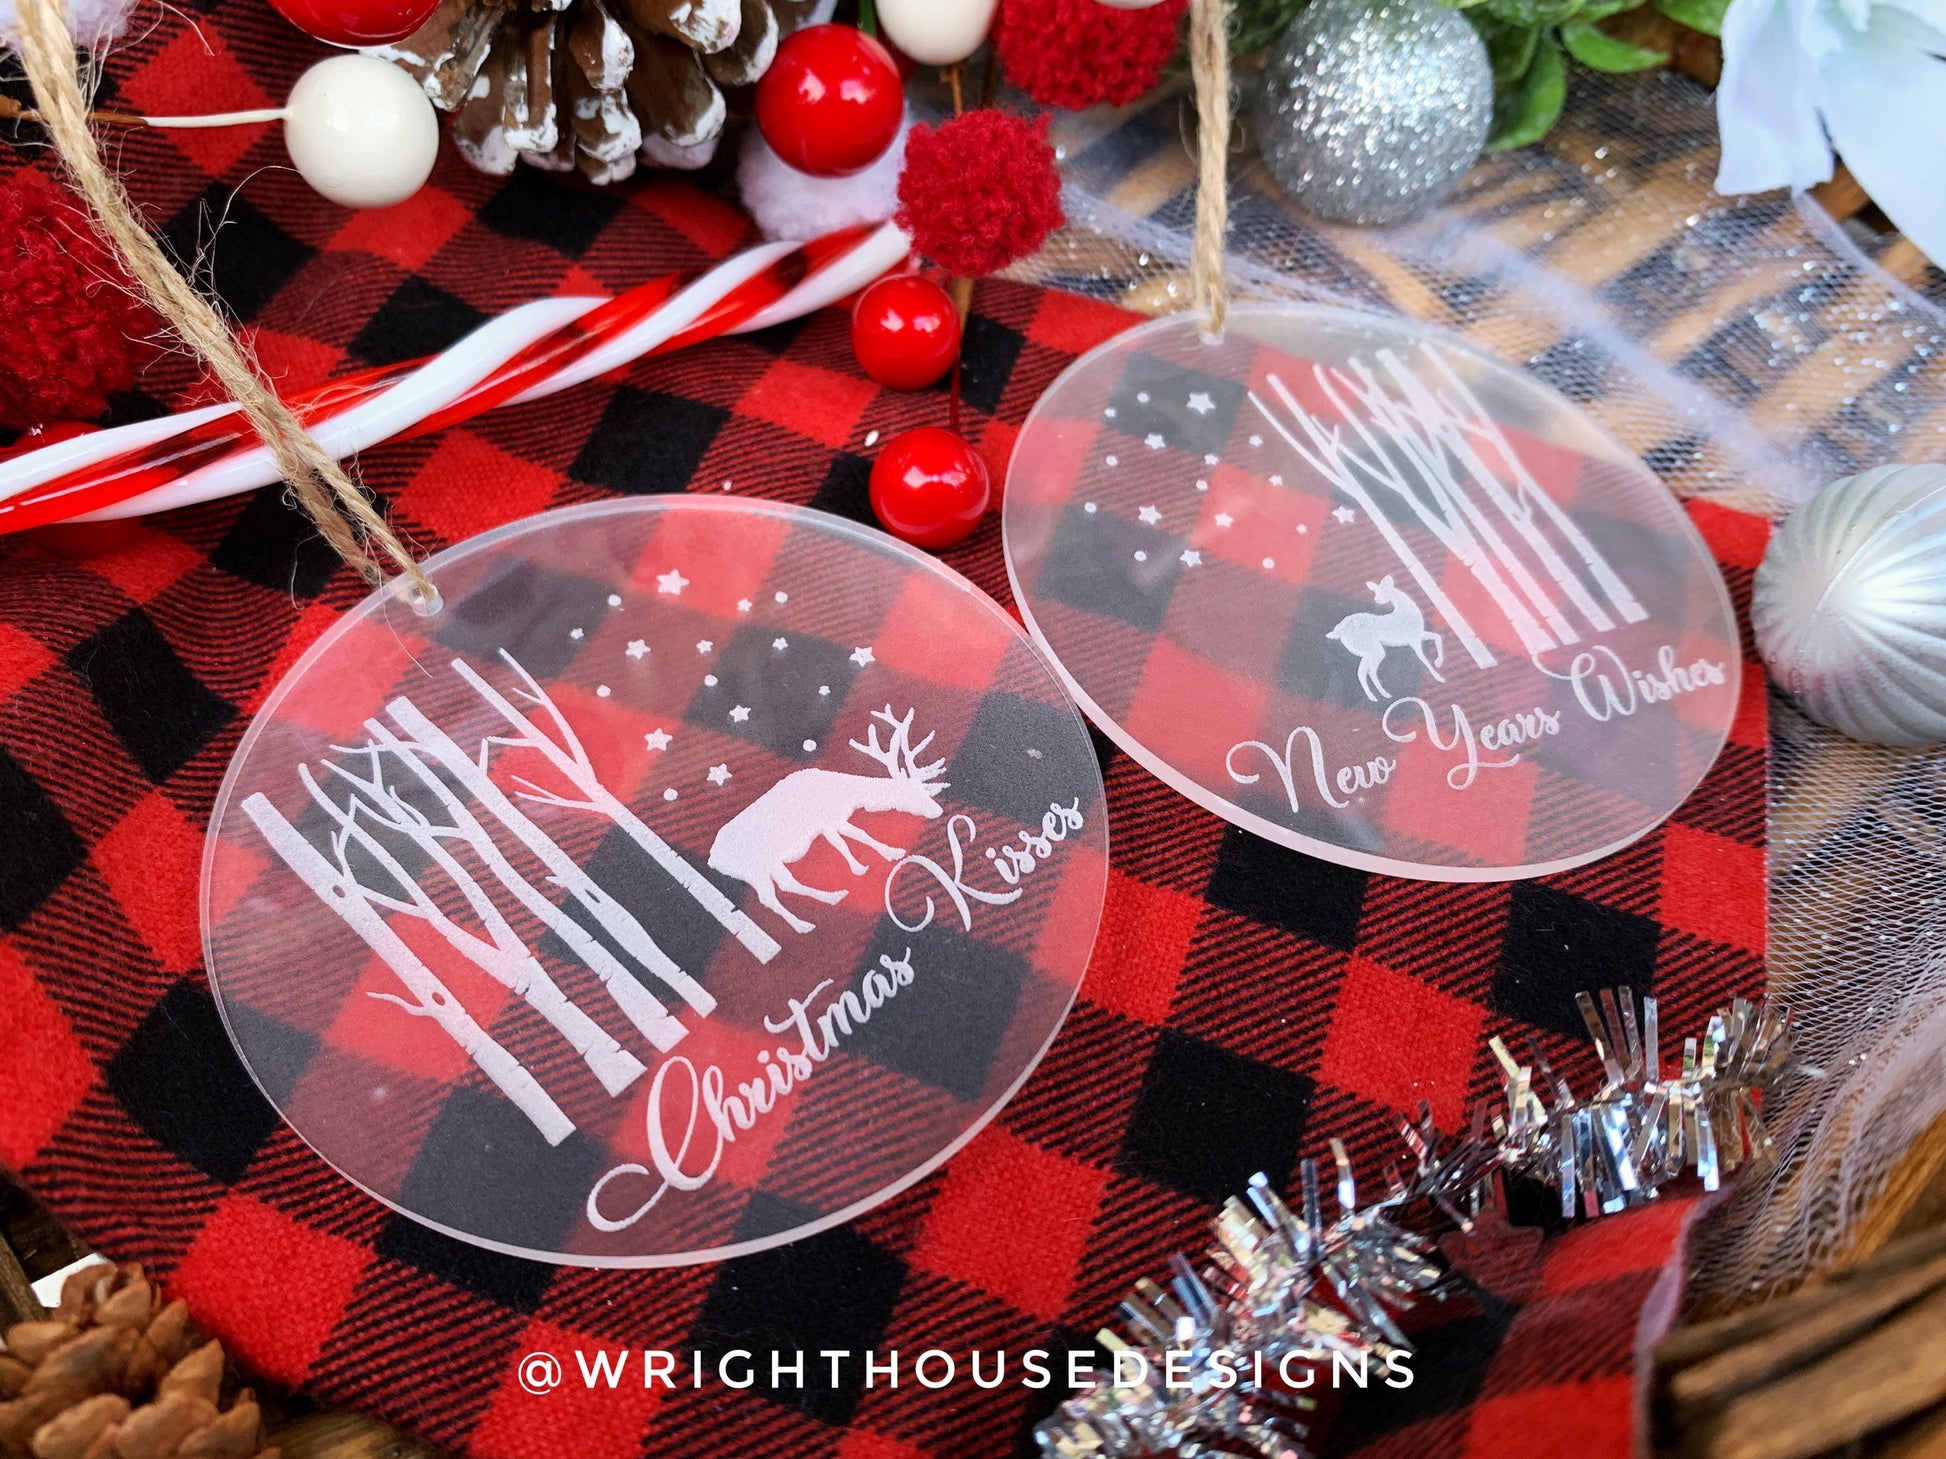 Reindeer Winter Night Sky Wooded Scene - Christmas Kisses - New Years Wishes - Laser Engraved Frosted Acrylic Christmas Tree Ornament Set